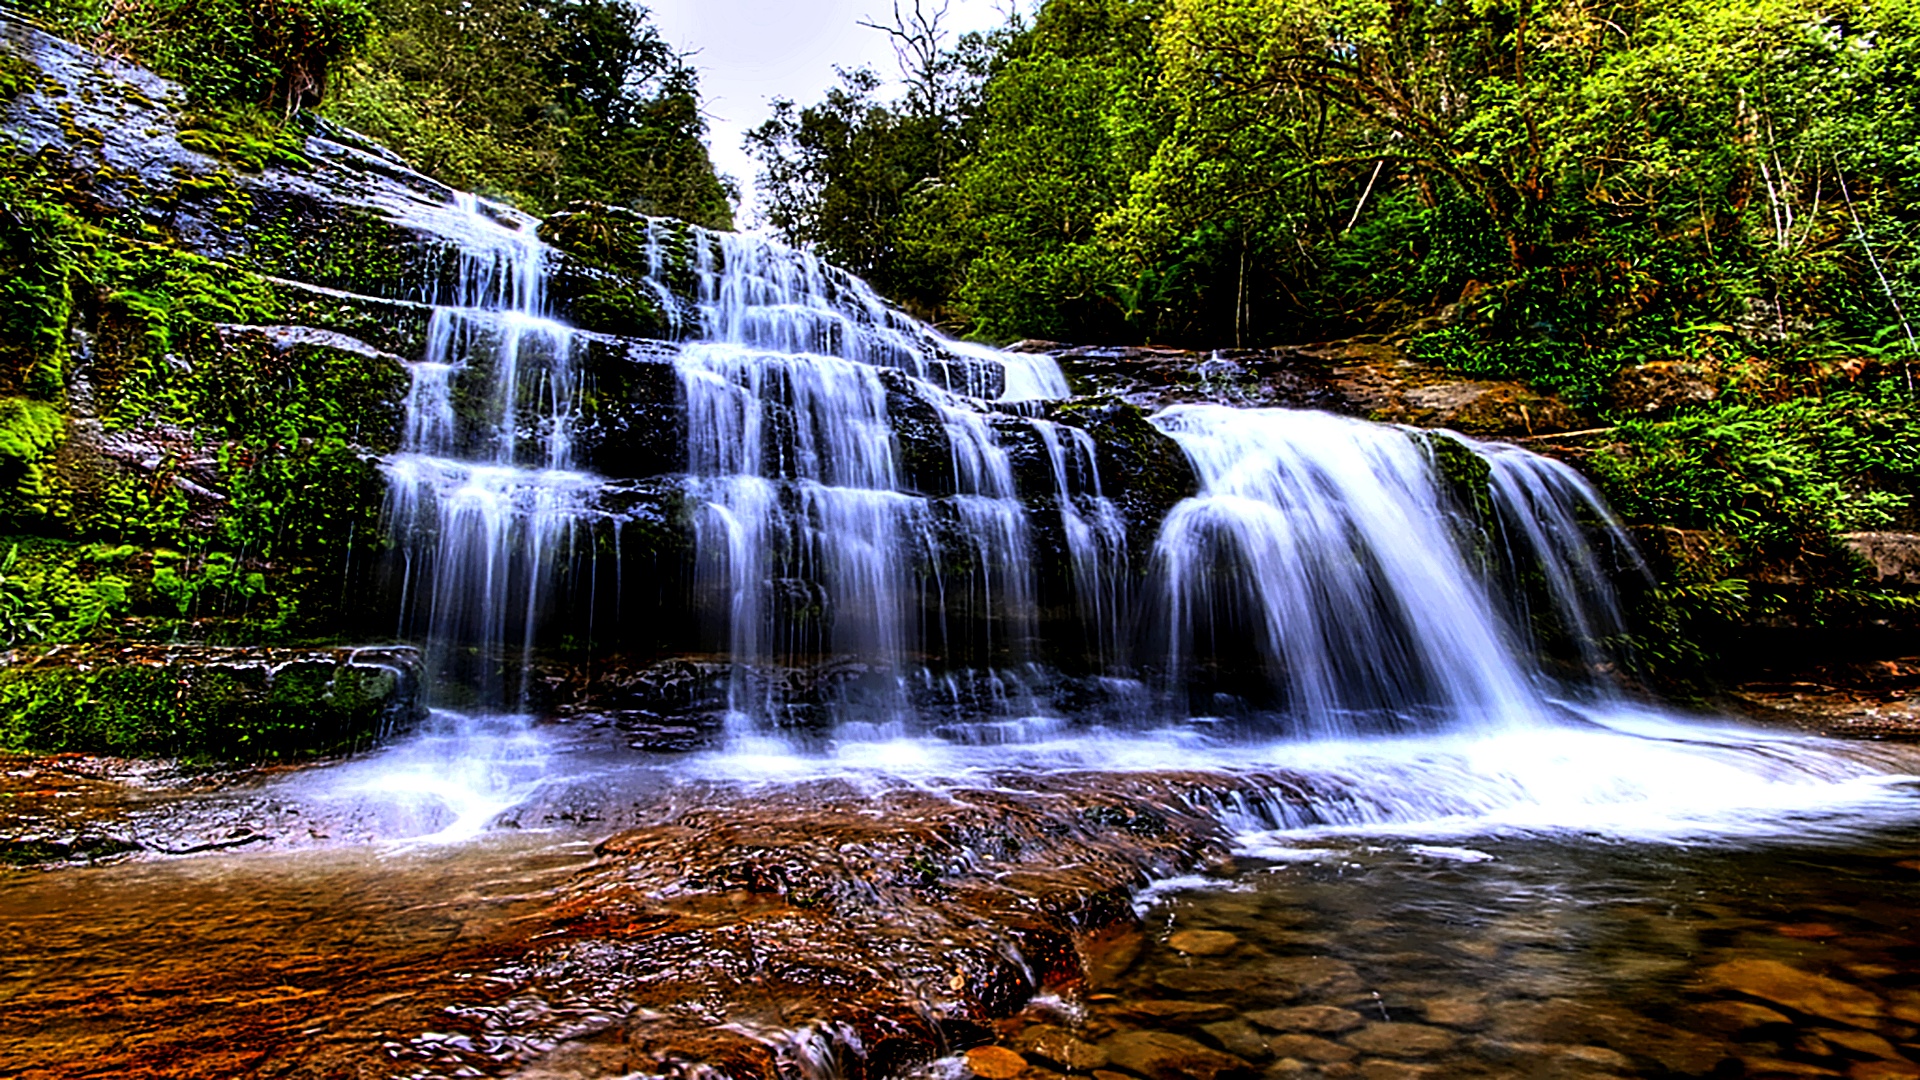 Share With Friends Waterfall Live Wallpaper